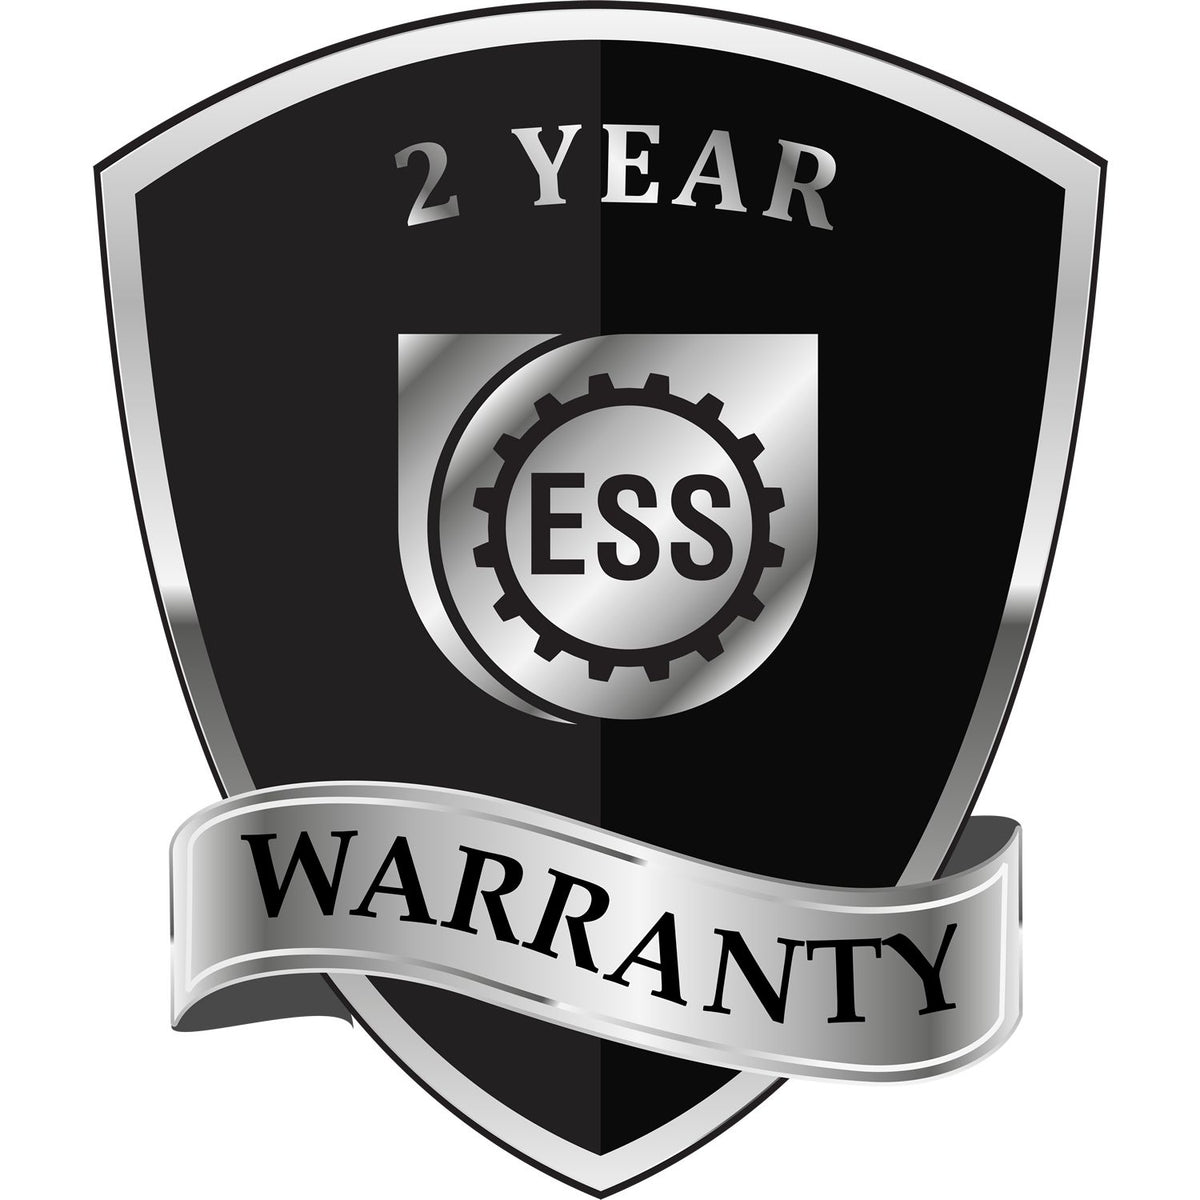 A badge or emblem showing a warranty icon for the Heavy Duty Cast Iron Alaska Architect Embosser